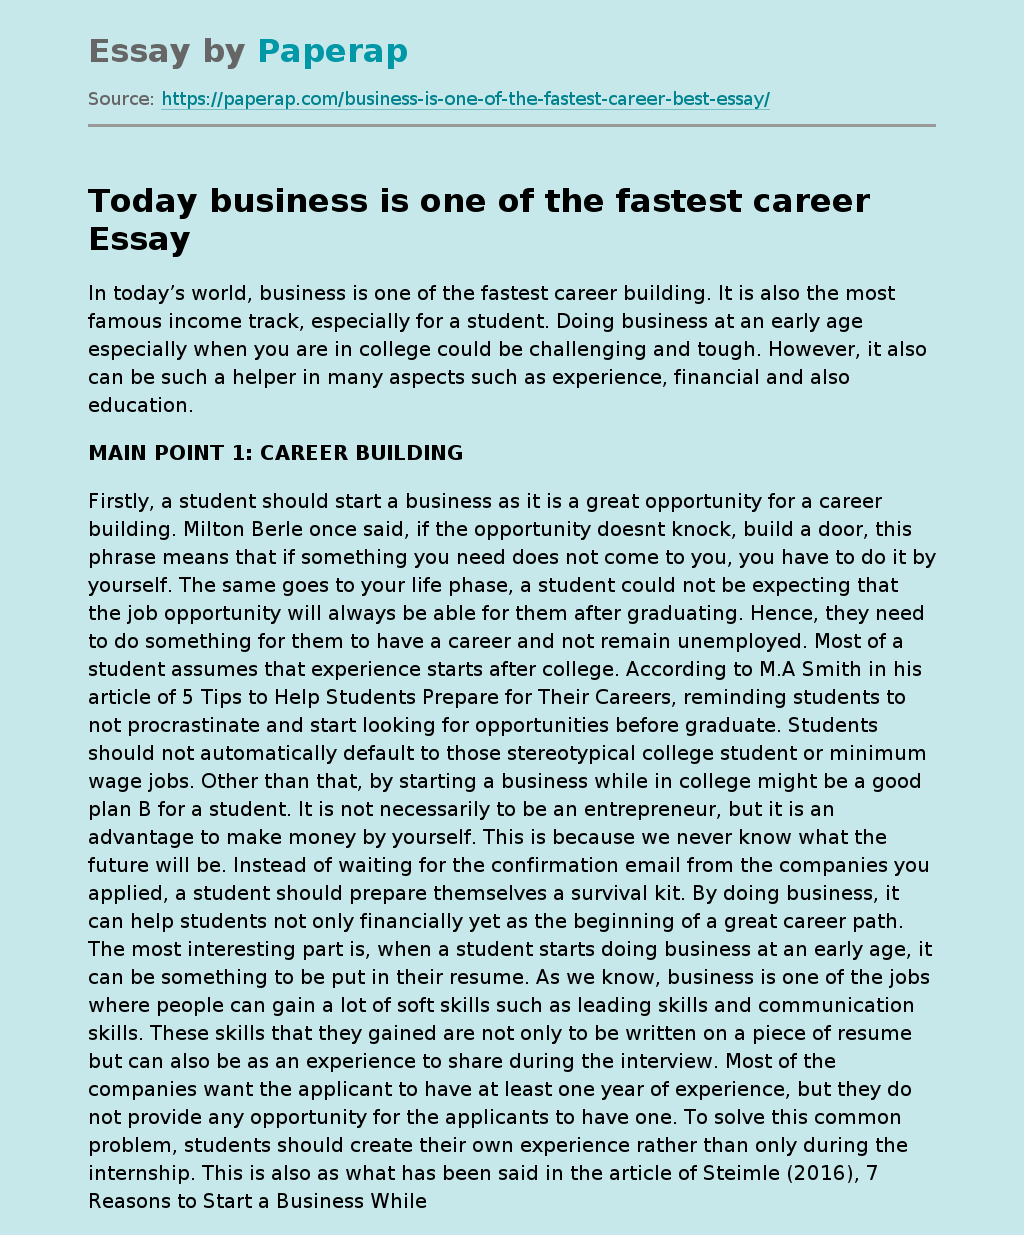 Today business is one of the fastest career